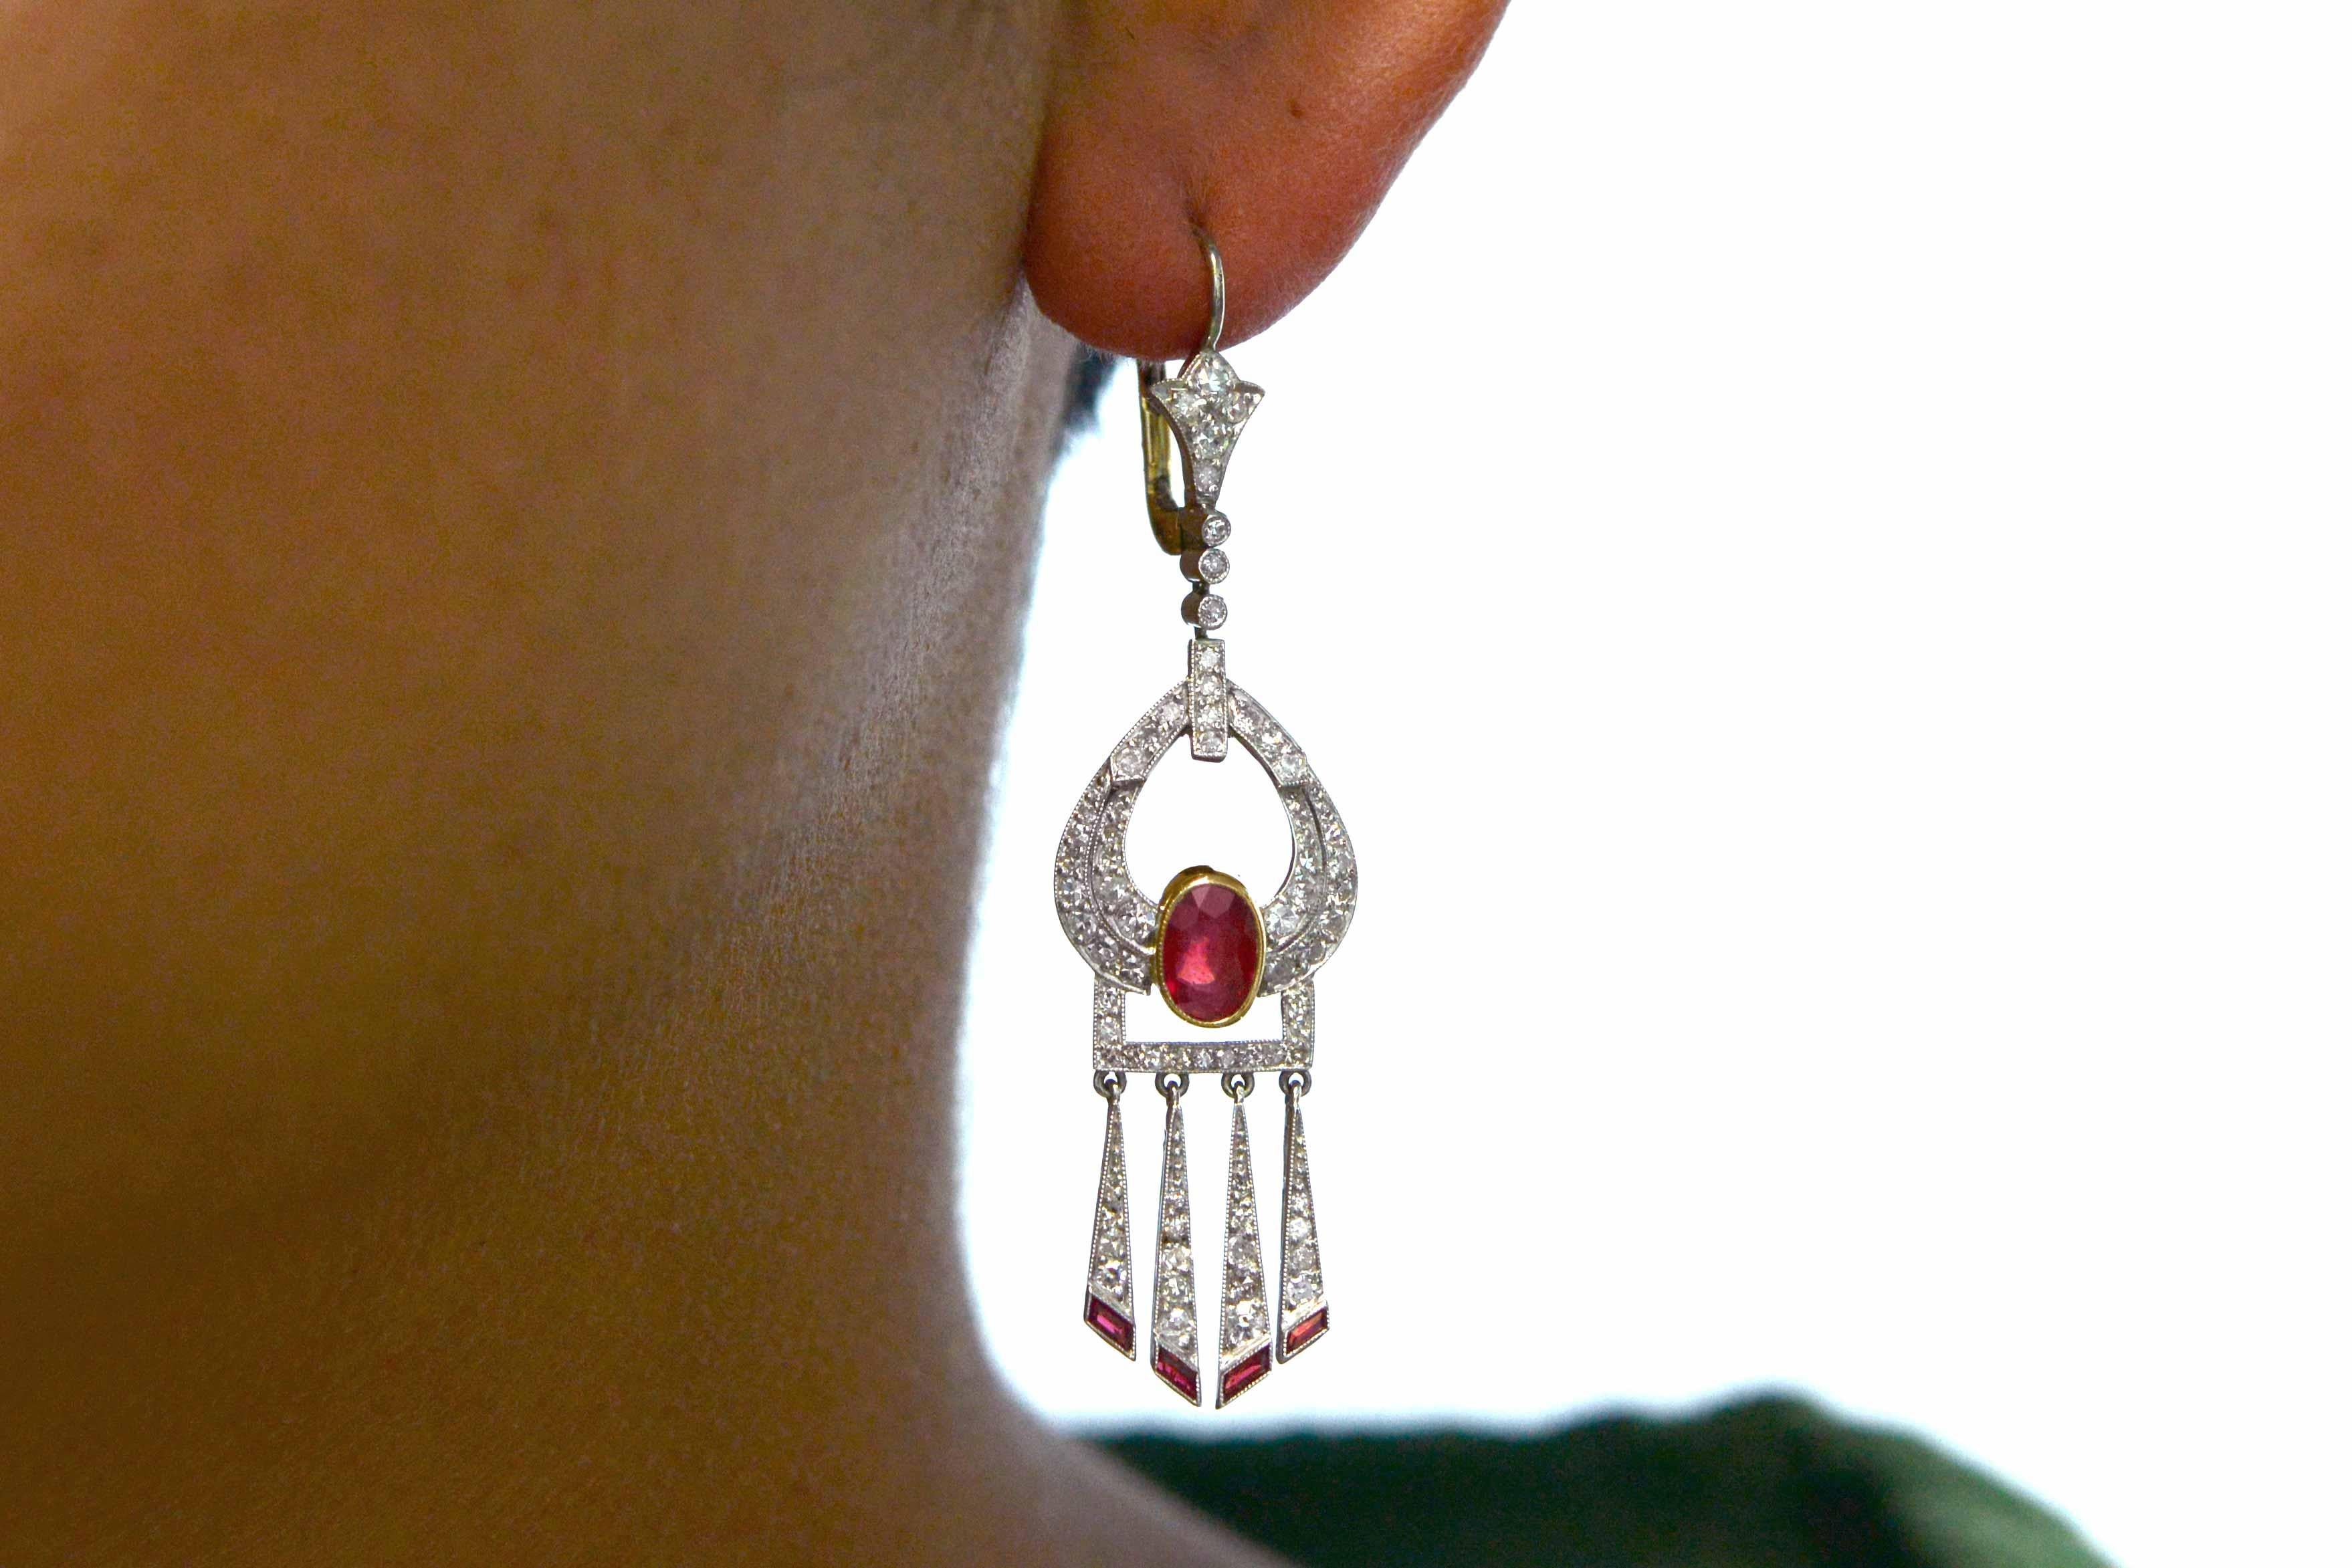 An exciting pair of authentic Art Deco ruby and diamond drop earrings. Centered by luscious, rich red Burmese rubies over 1 carat each and surrounded by an intricate, milgrain frame studded with nearly 2 carats of sparkling old cut diamonds. The